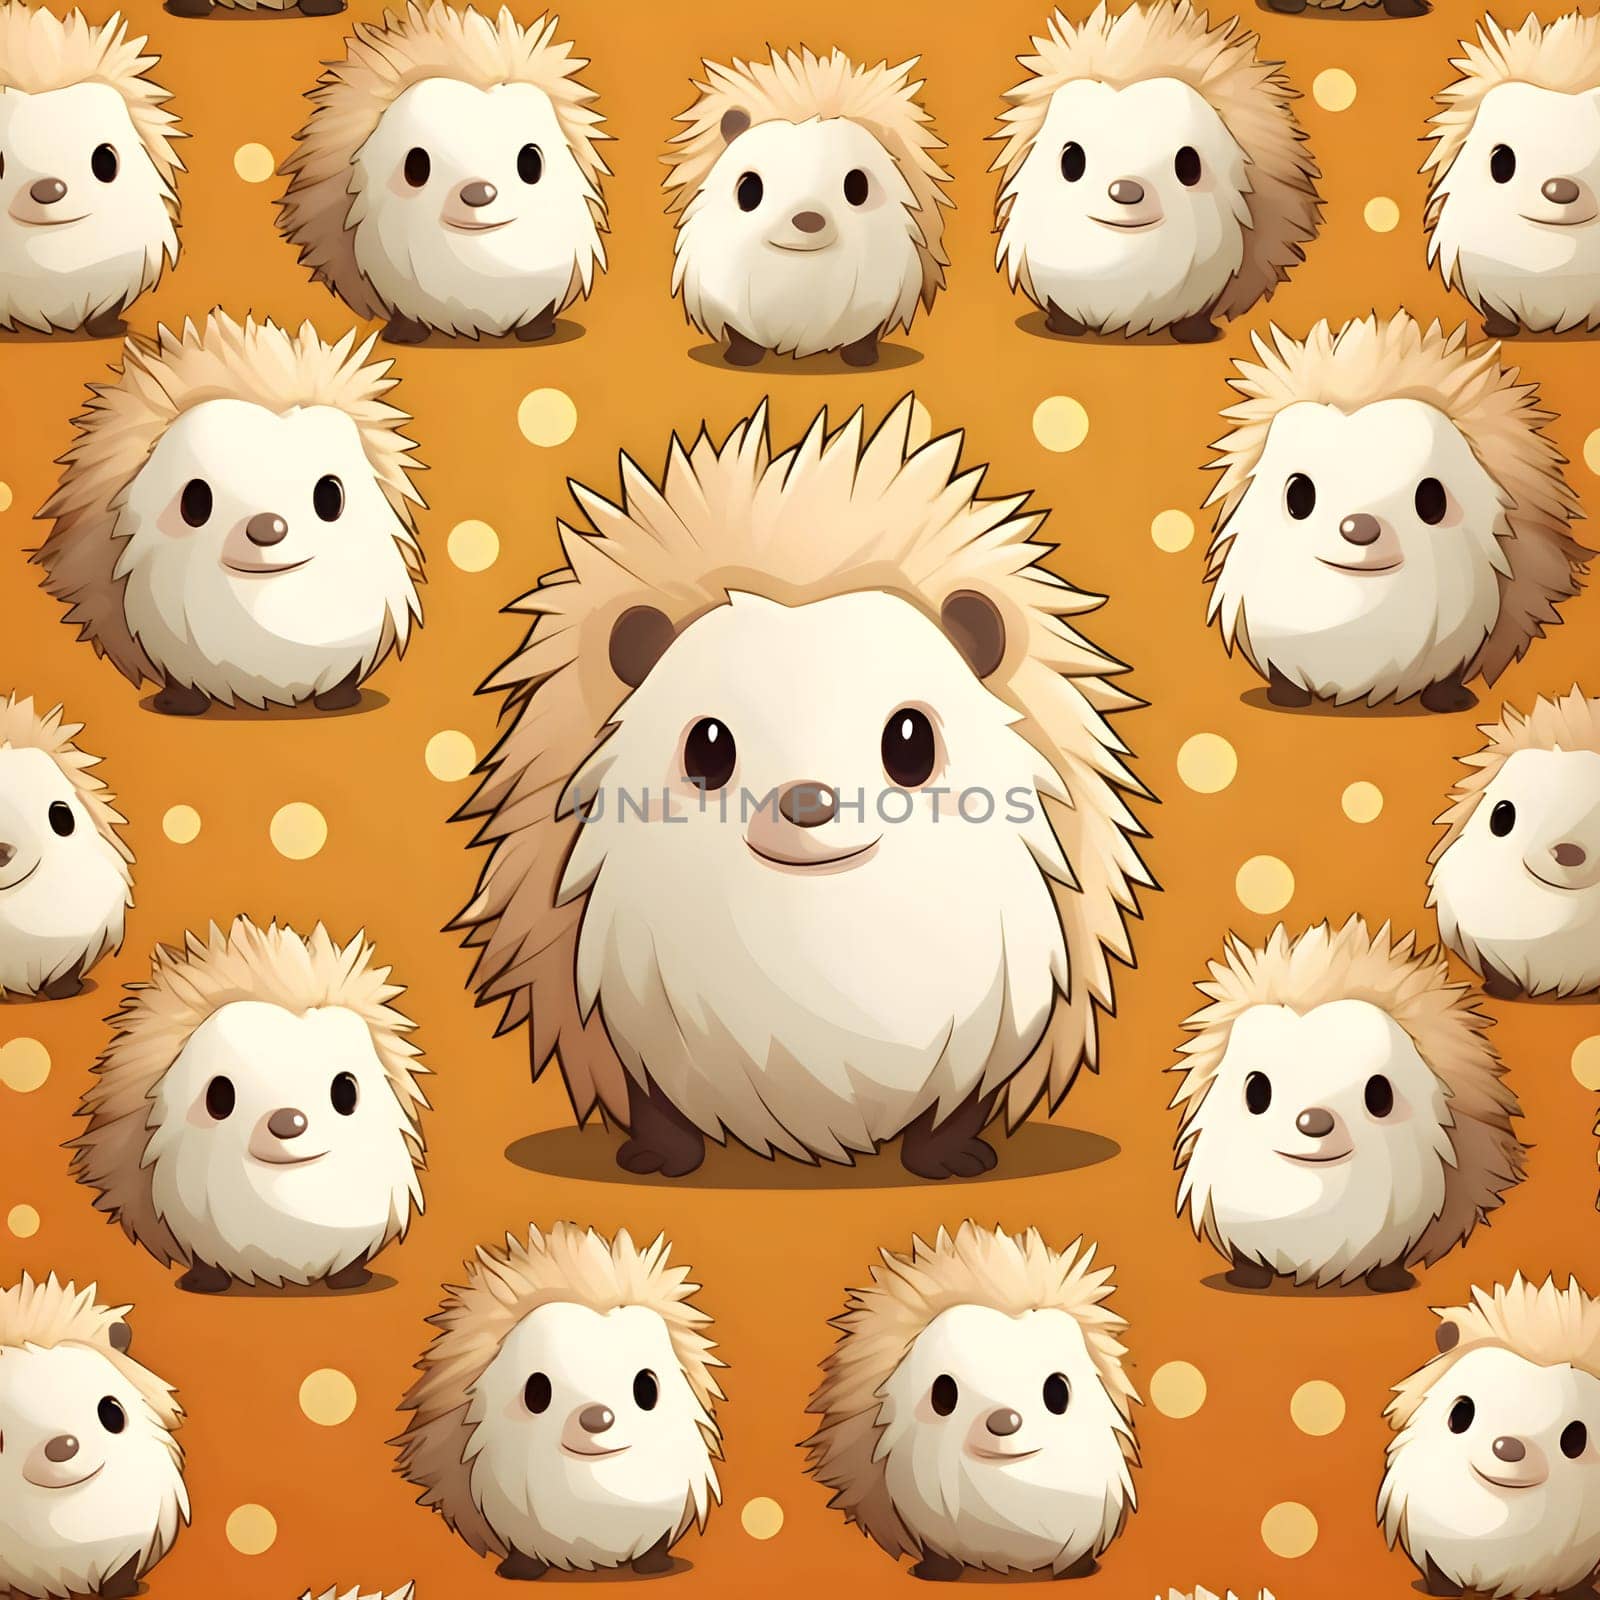 Patterns and banners backgrounds: Seamless pattern with cute hedgehogs on orange background illustration